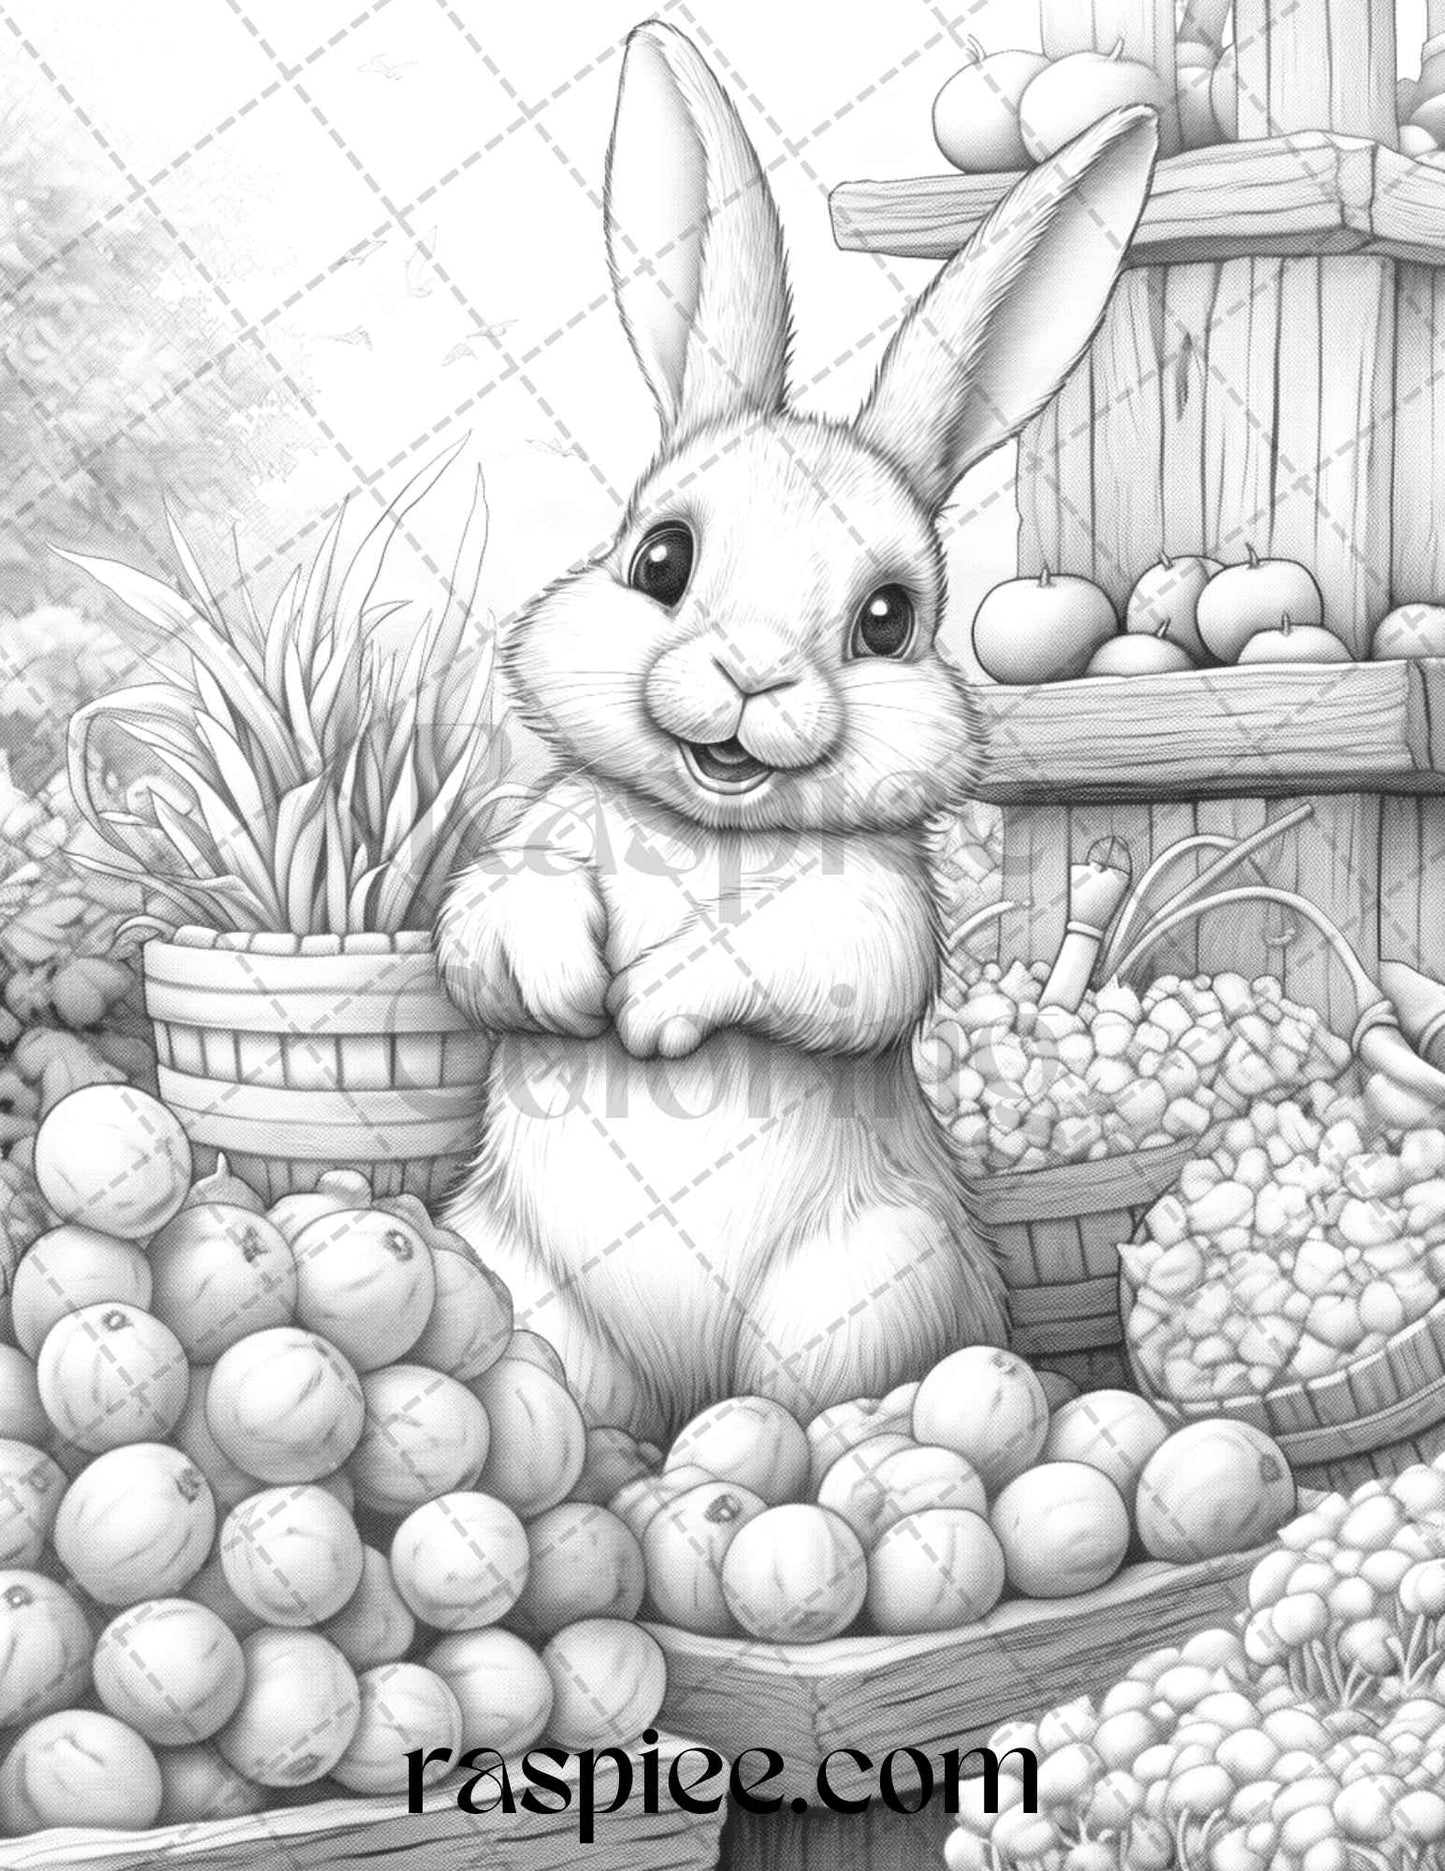 50 Rabbit Garden Grayscale Coloring Pages Printable for Adults, PDF File Instant Download - raspiee